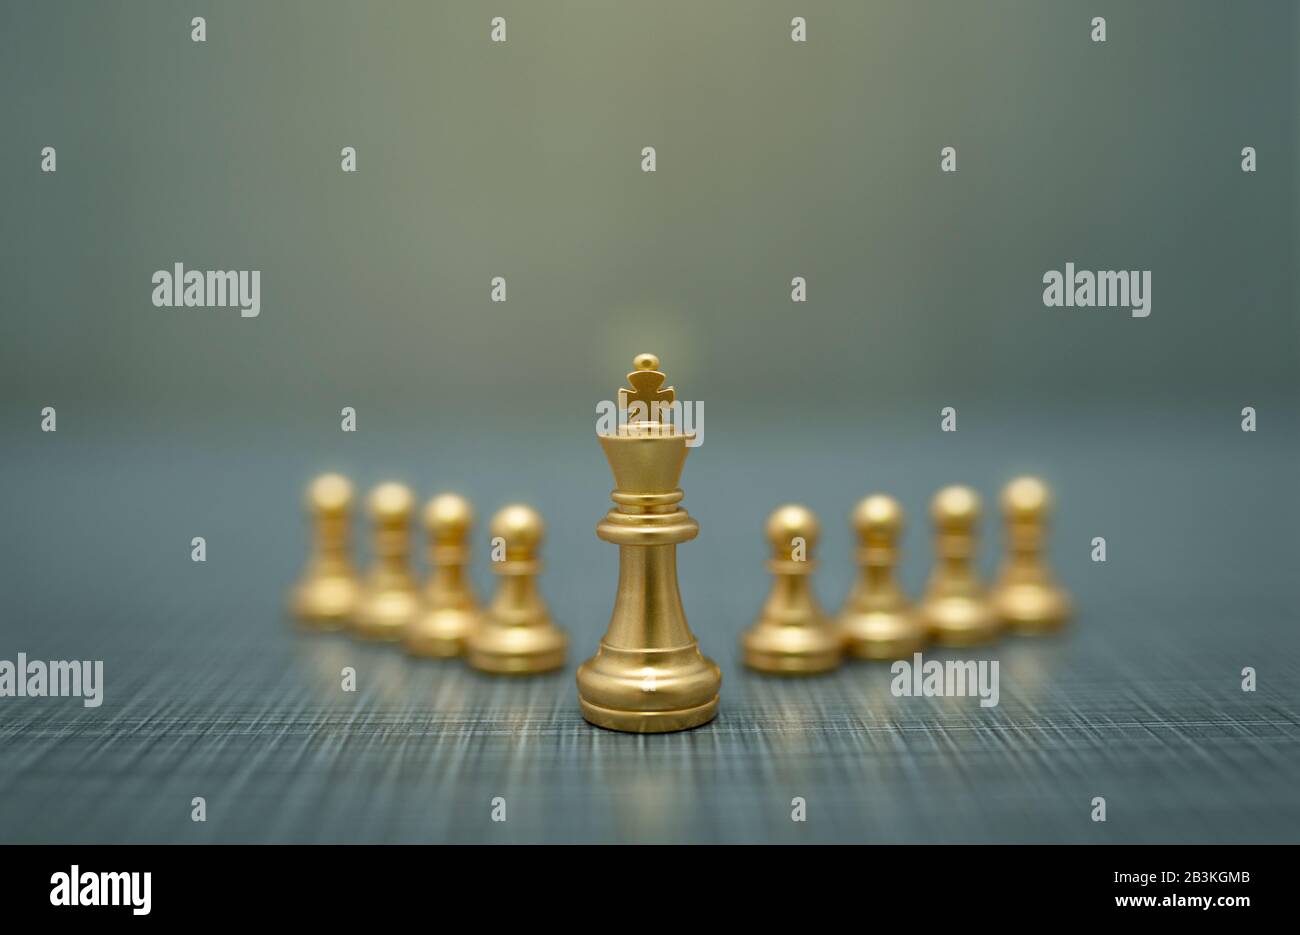 Premium Photo, Golden king chess piece concept for business competition  and strategy.